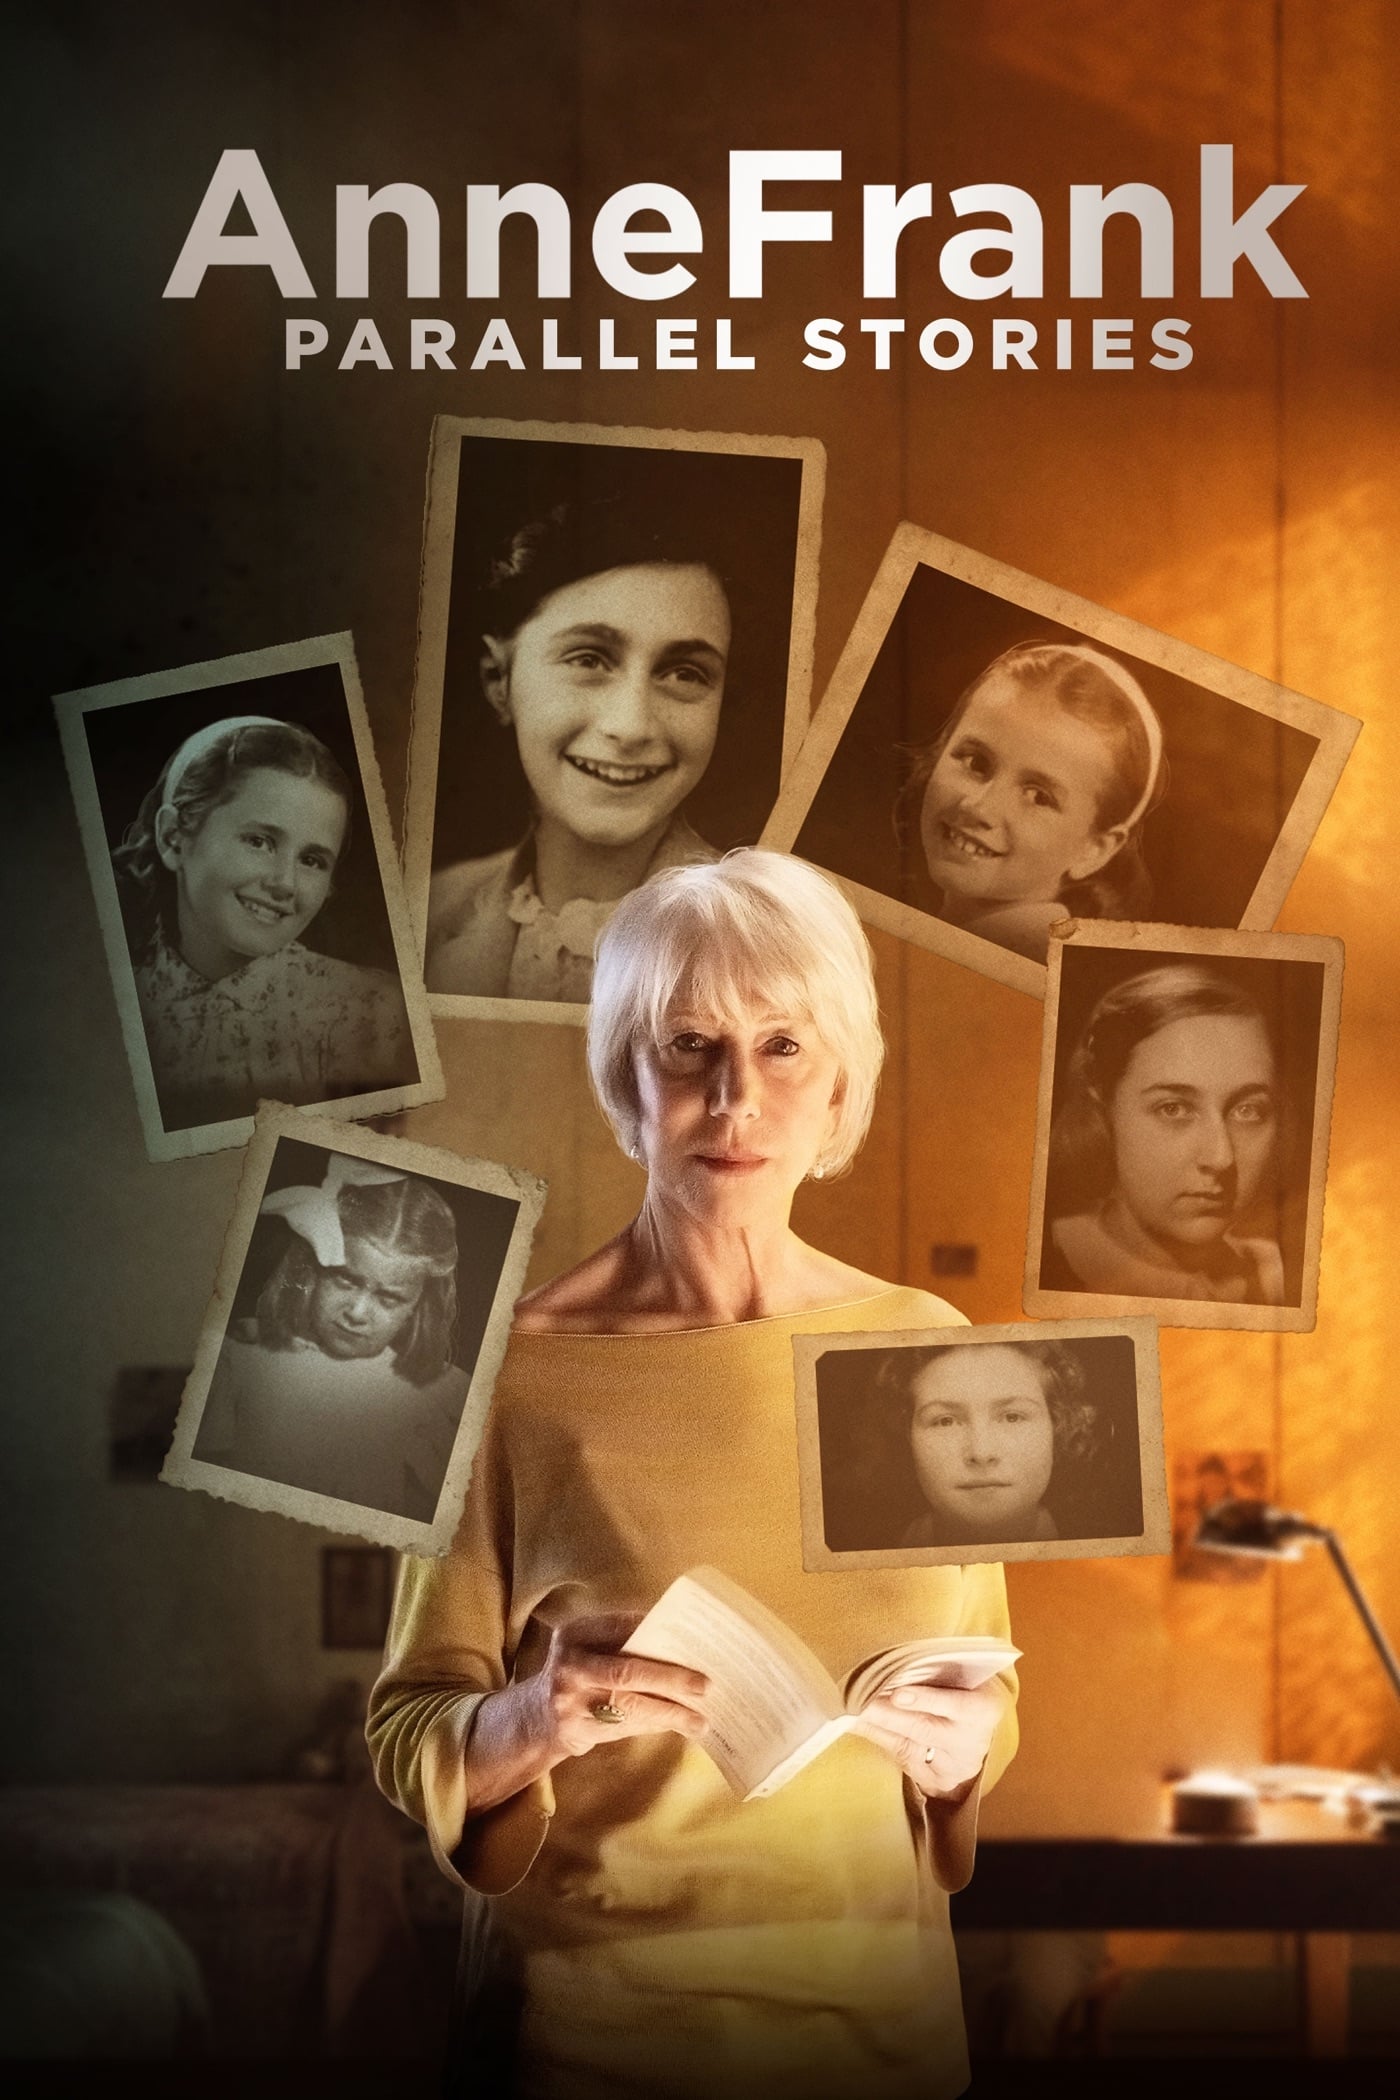 ANNE FRANK PARALLEL STORIES